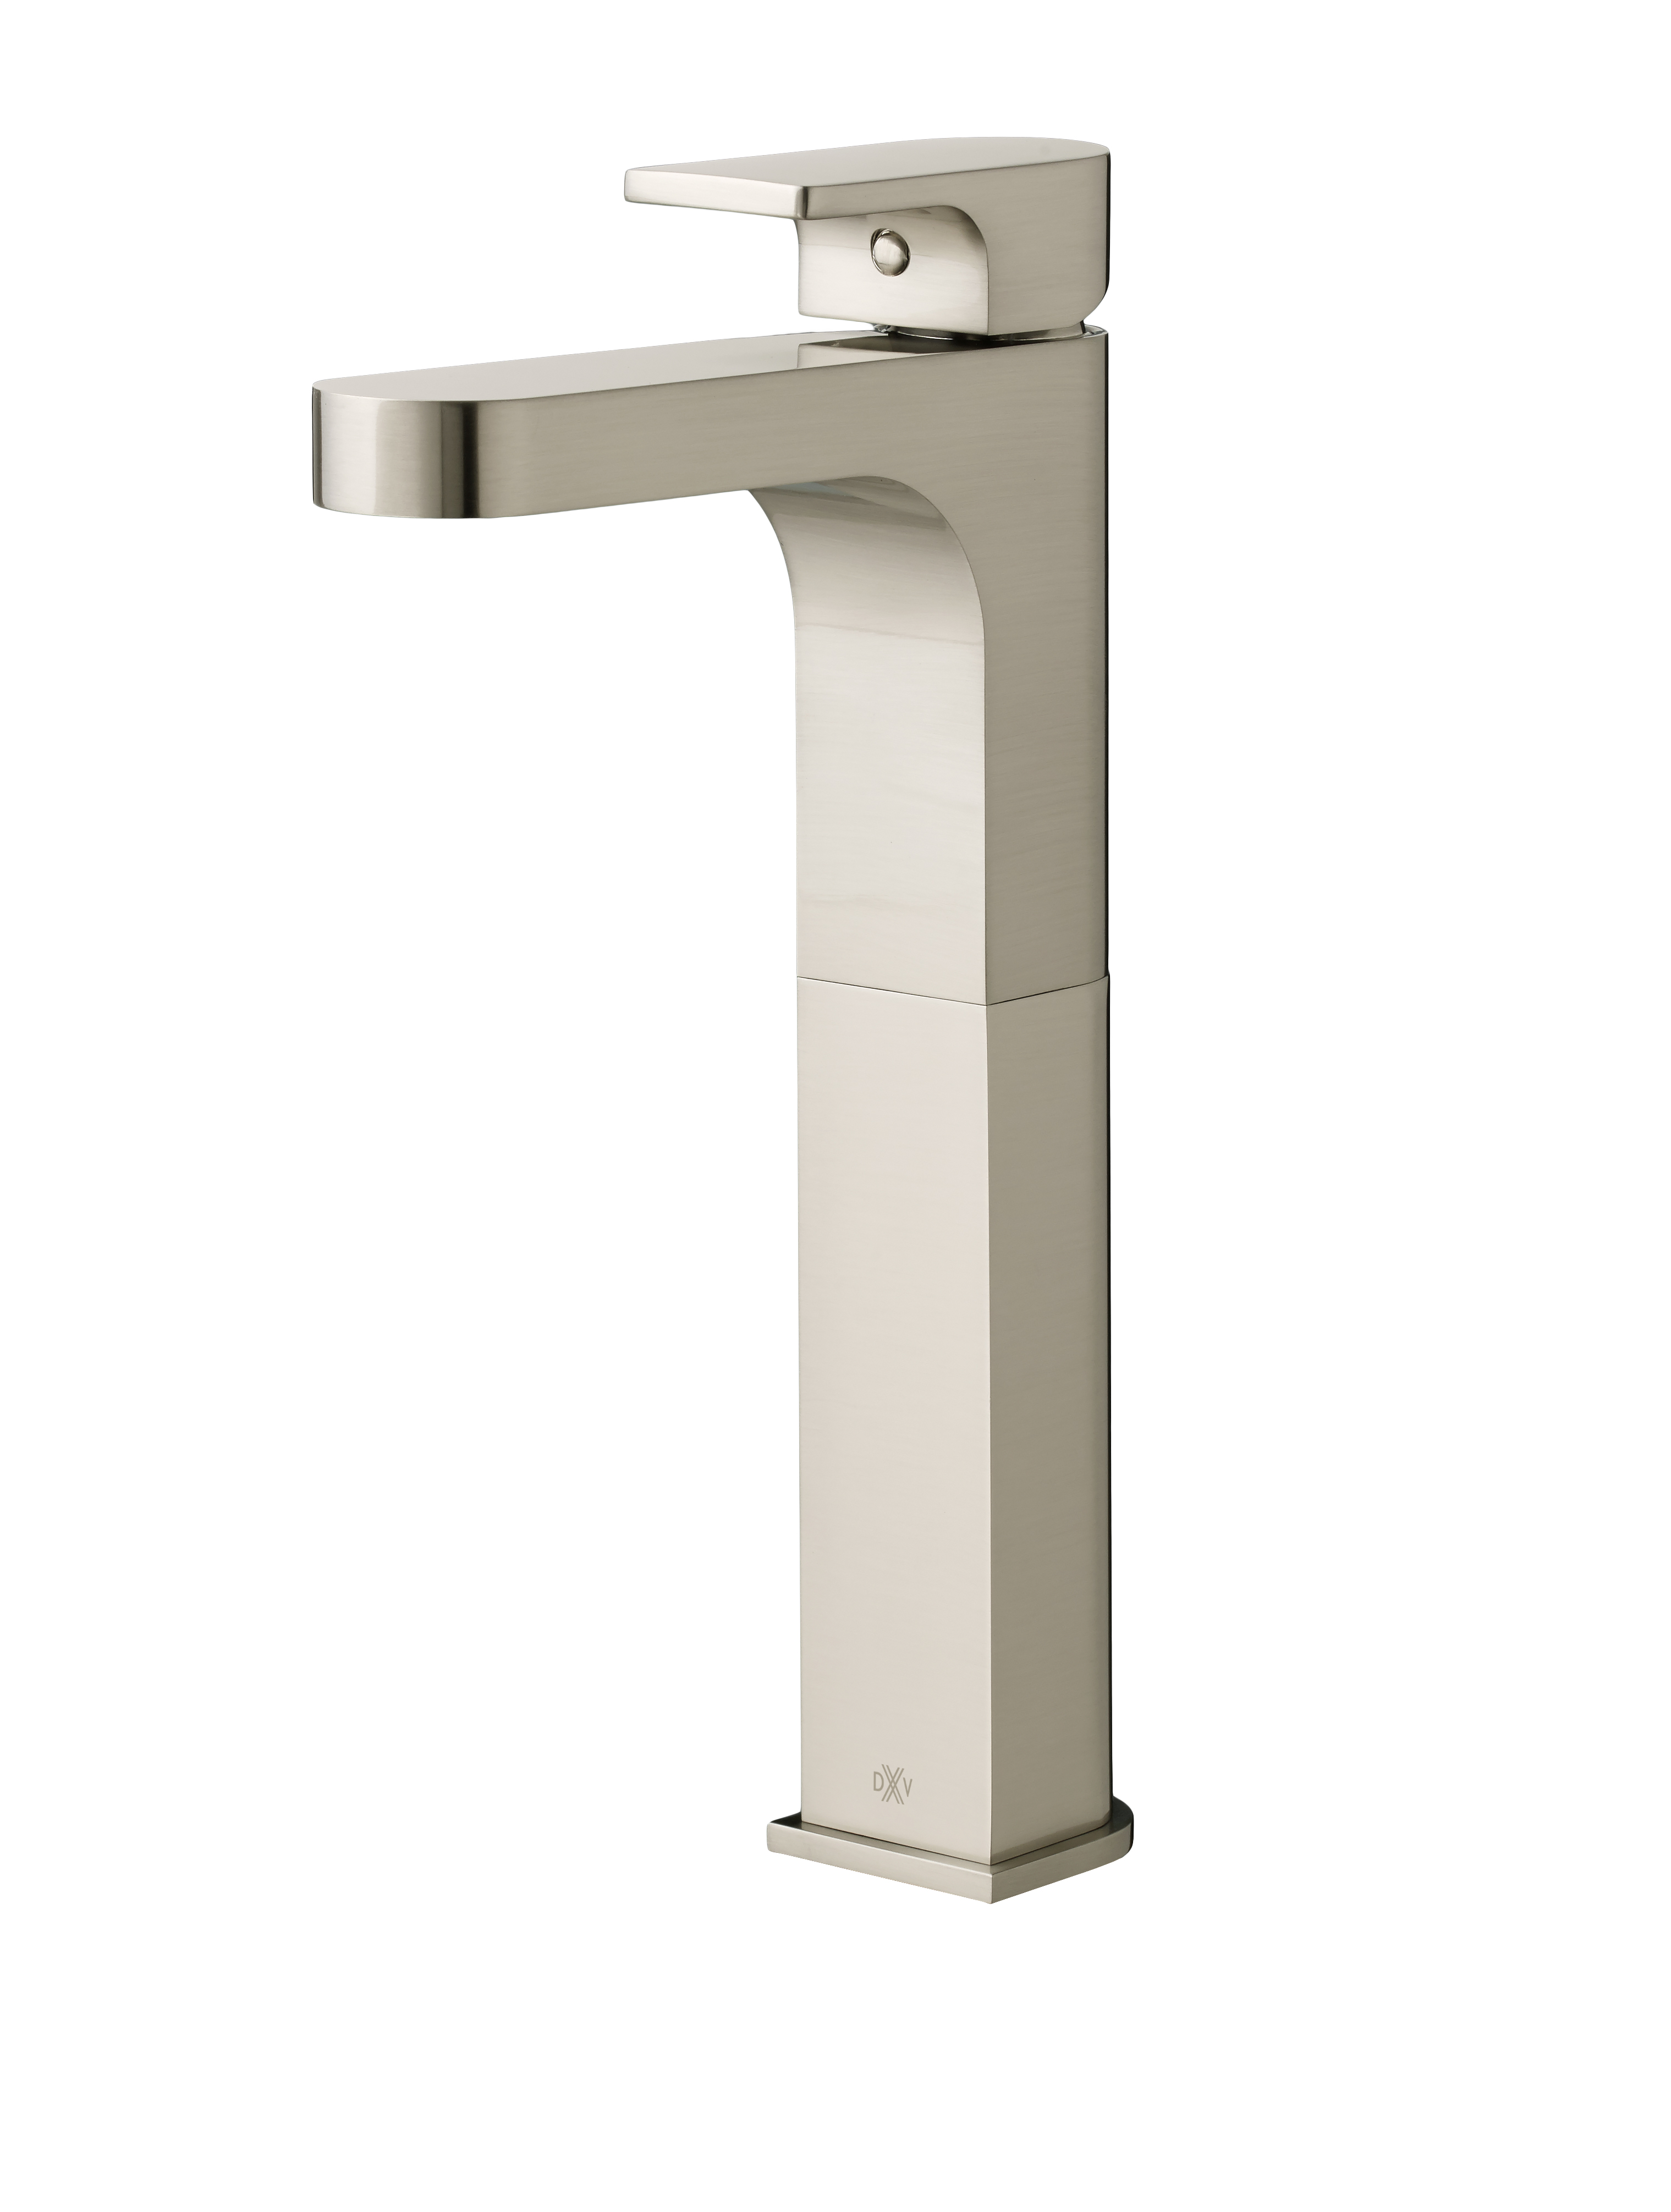 Equility® Single Handle Vessel Bathroom Faucet with Lever Handle